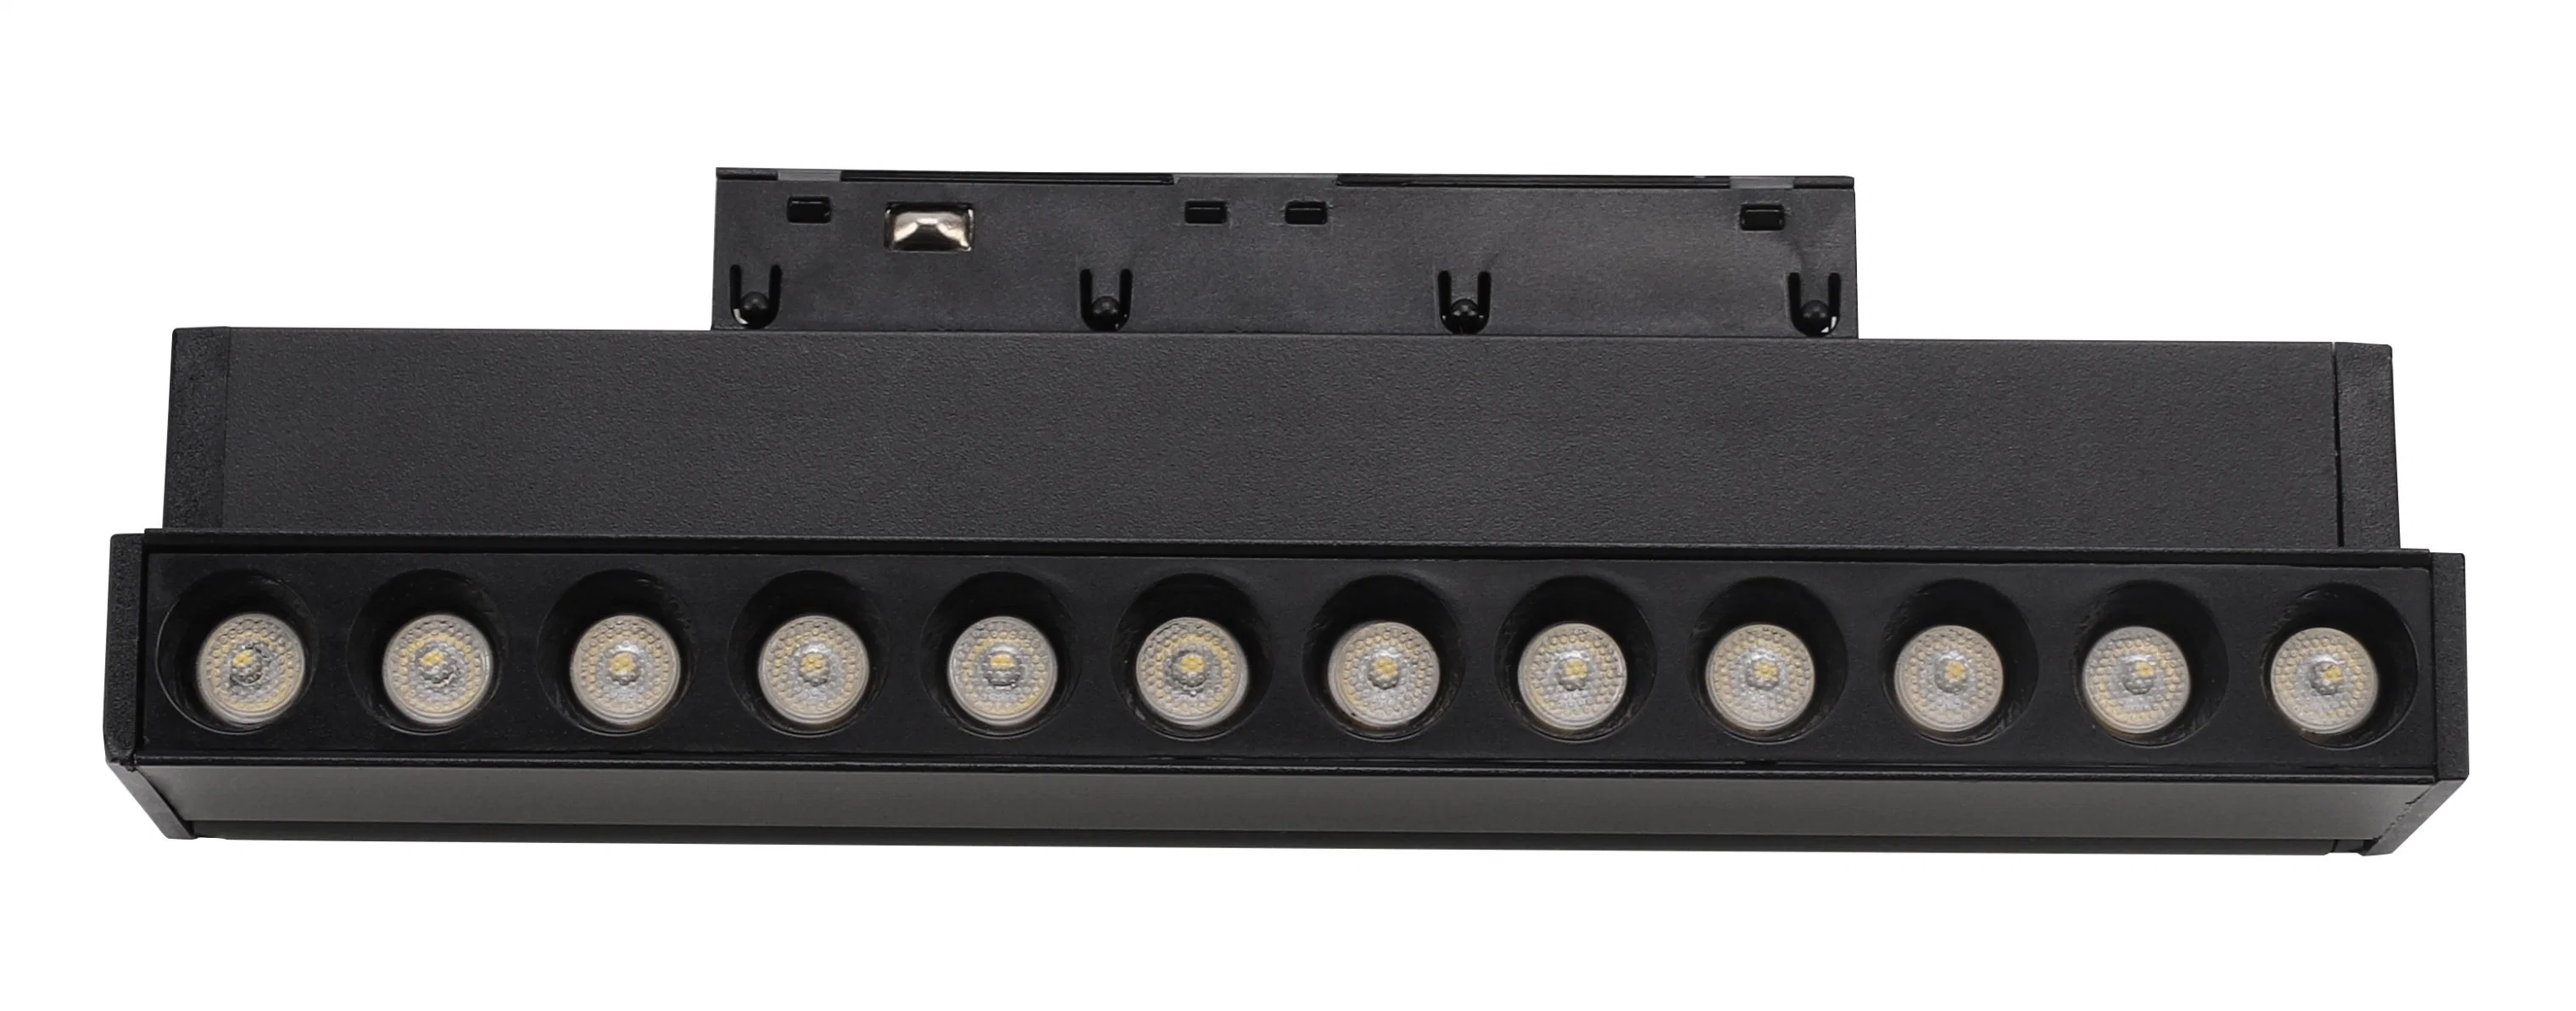 Black/White Oteshen China Magnetic Track LED Interior Lighting with EMC High quality/High cost performance  Tx0140b-12p